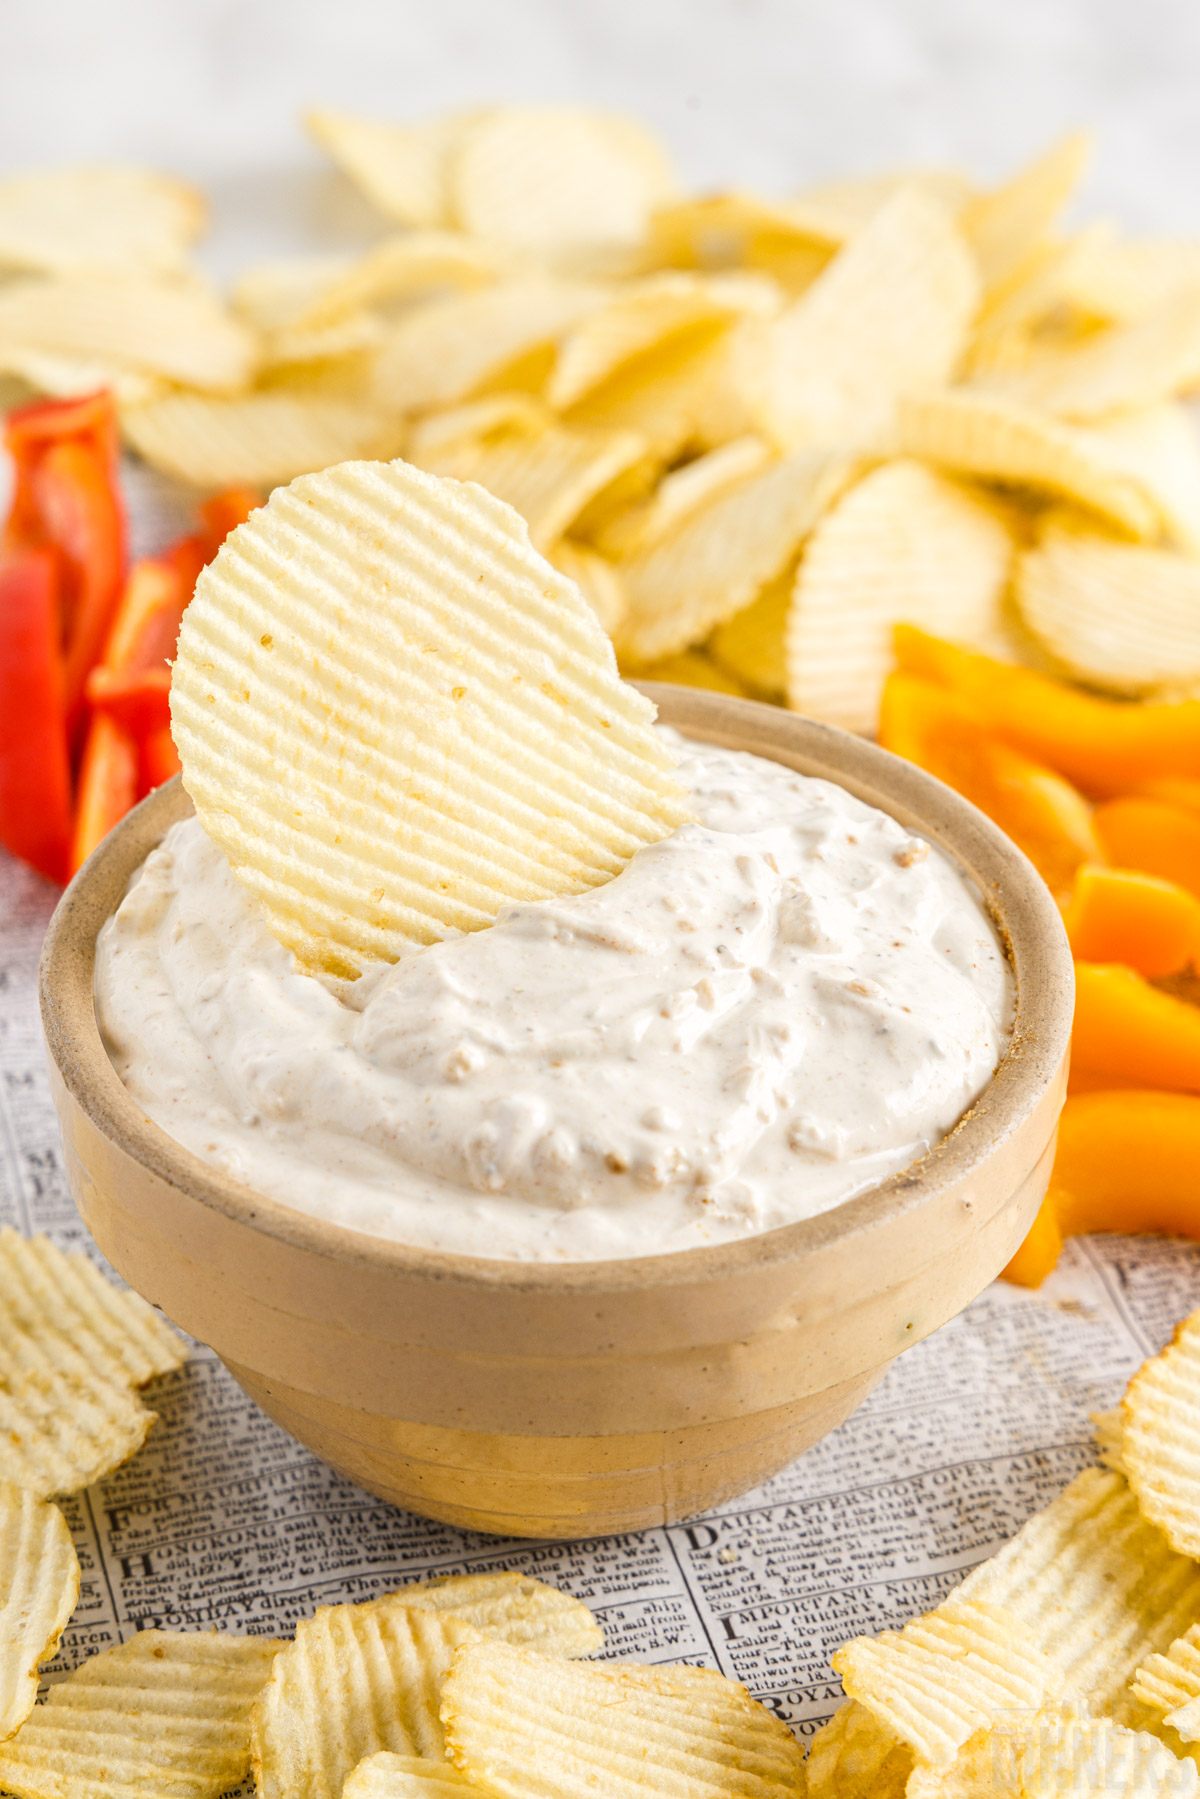 åbning auroch gennemskueligt The Best Sour Cream And Onion Dip Recipe - Family Dinners